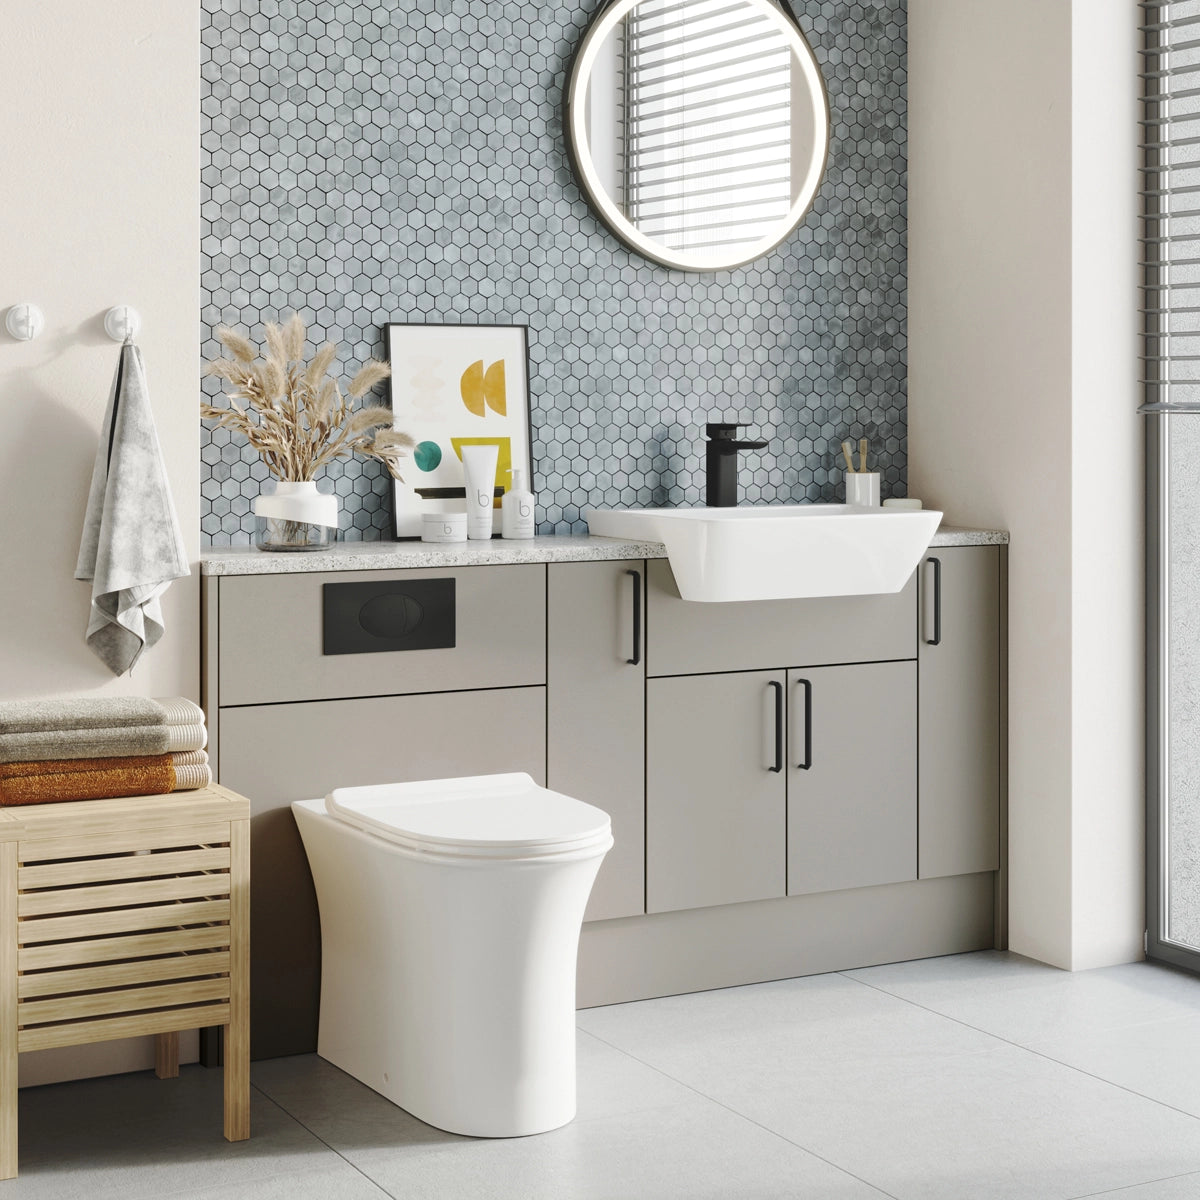 Deia Comfort Height Rimless Back to Wall Scudo WC Toilet with Soft Close Toilet Seat Option